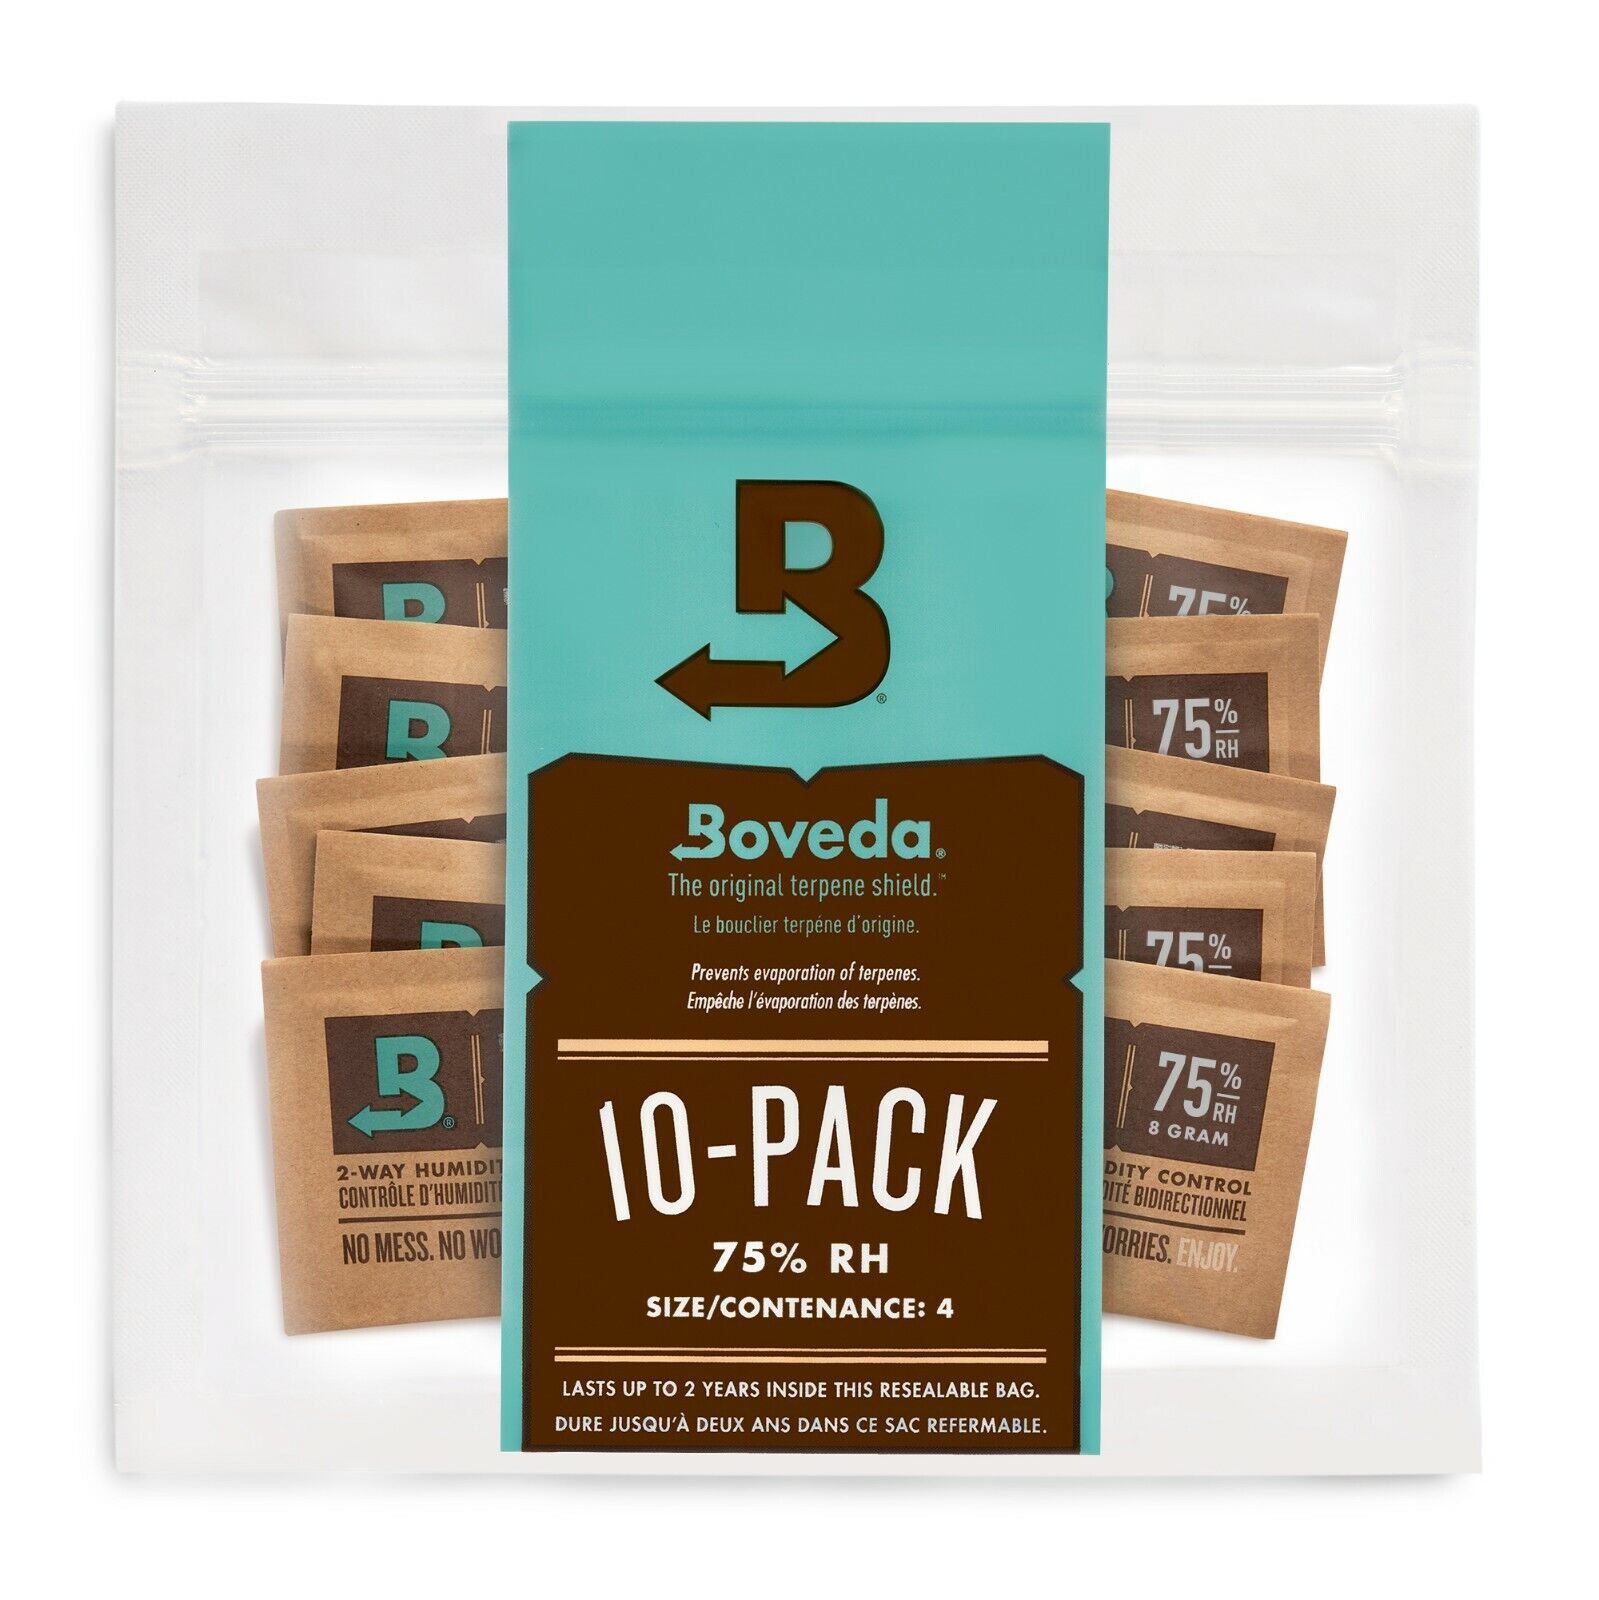 Boveda 75% RH 2-Way Humidity Control - Protects & Restores - Size 8 - 10 Count